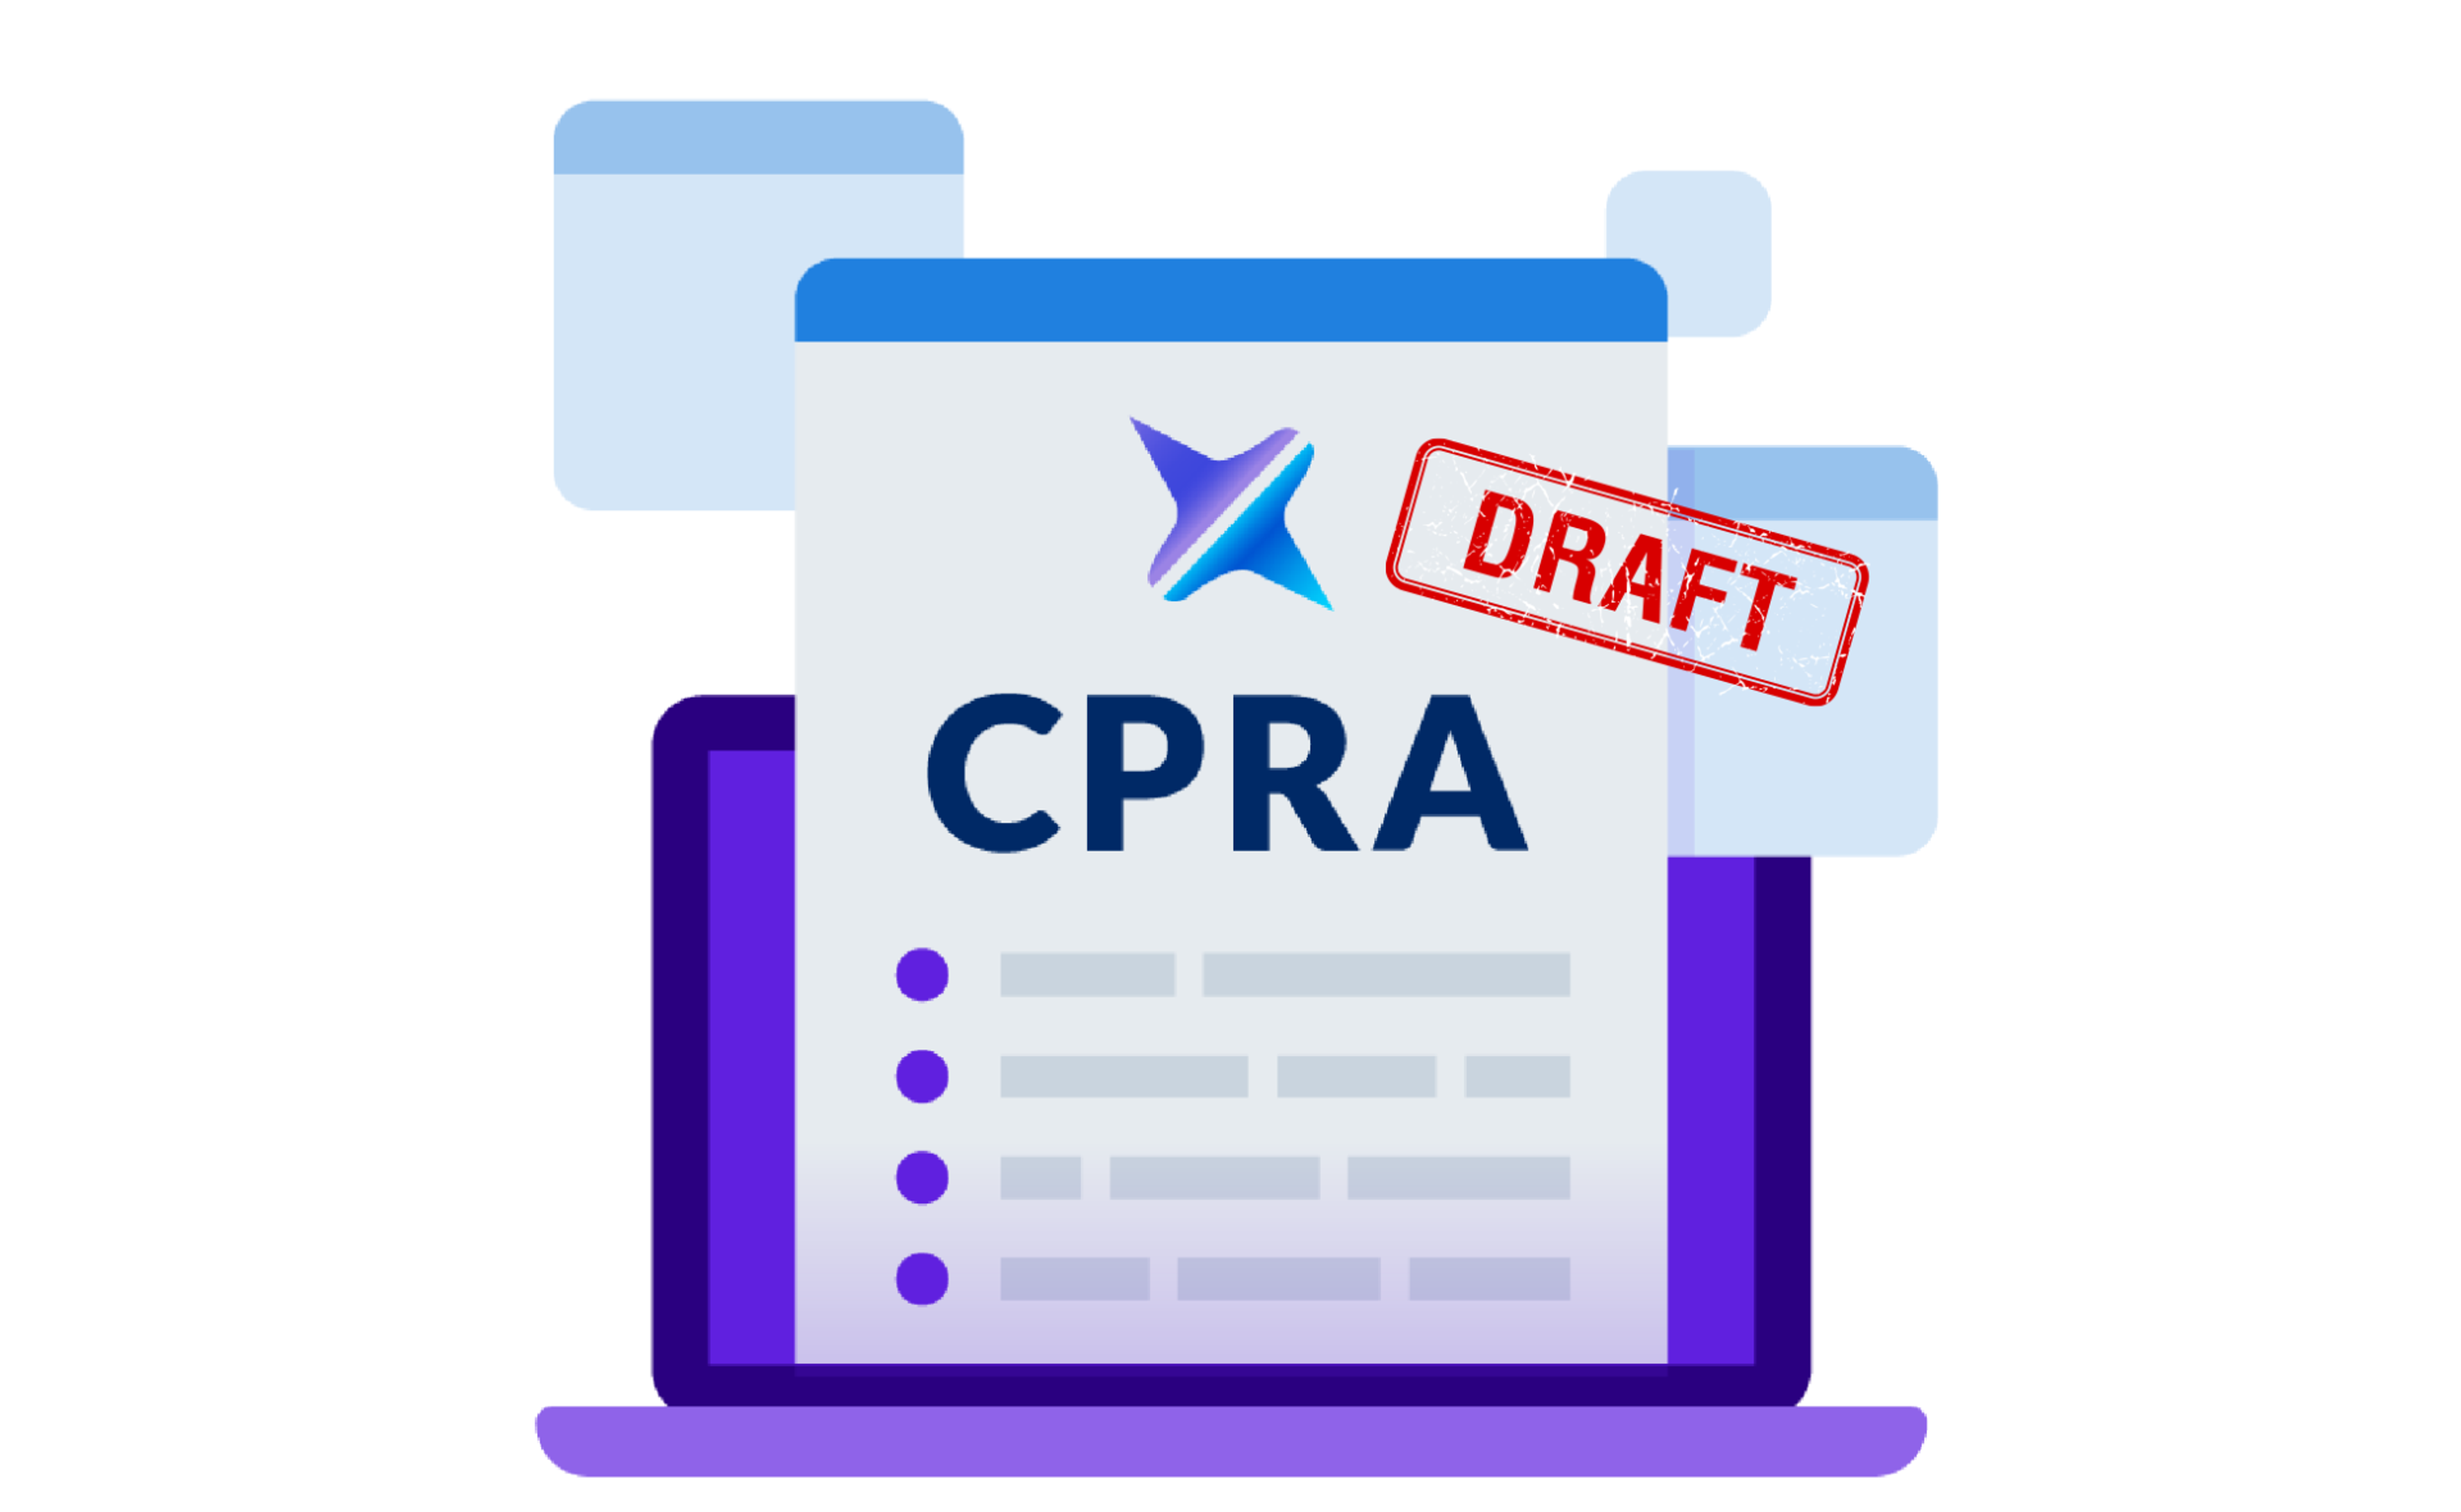 Understanding what is next with CPRA